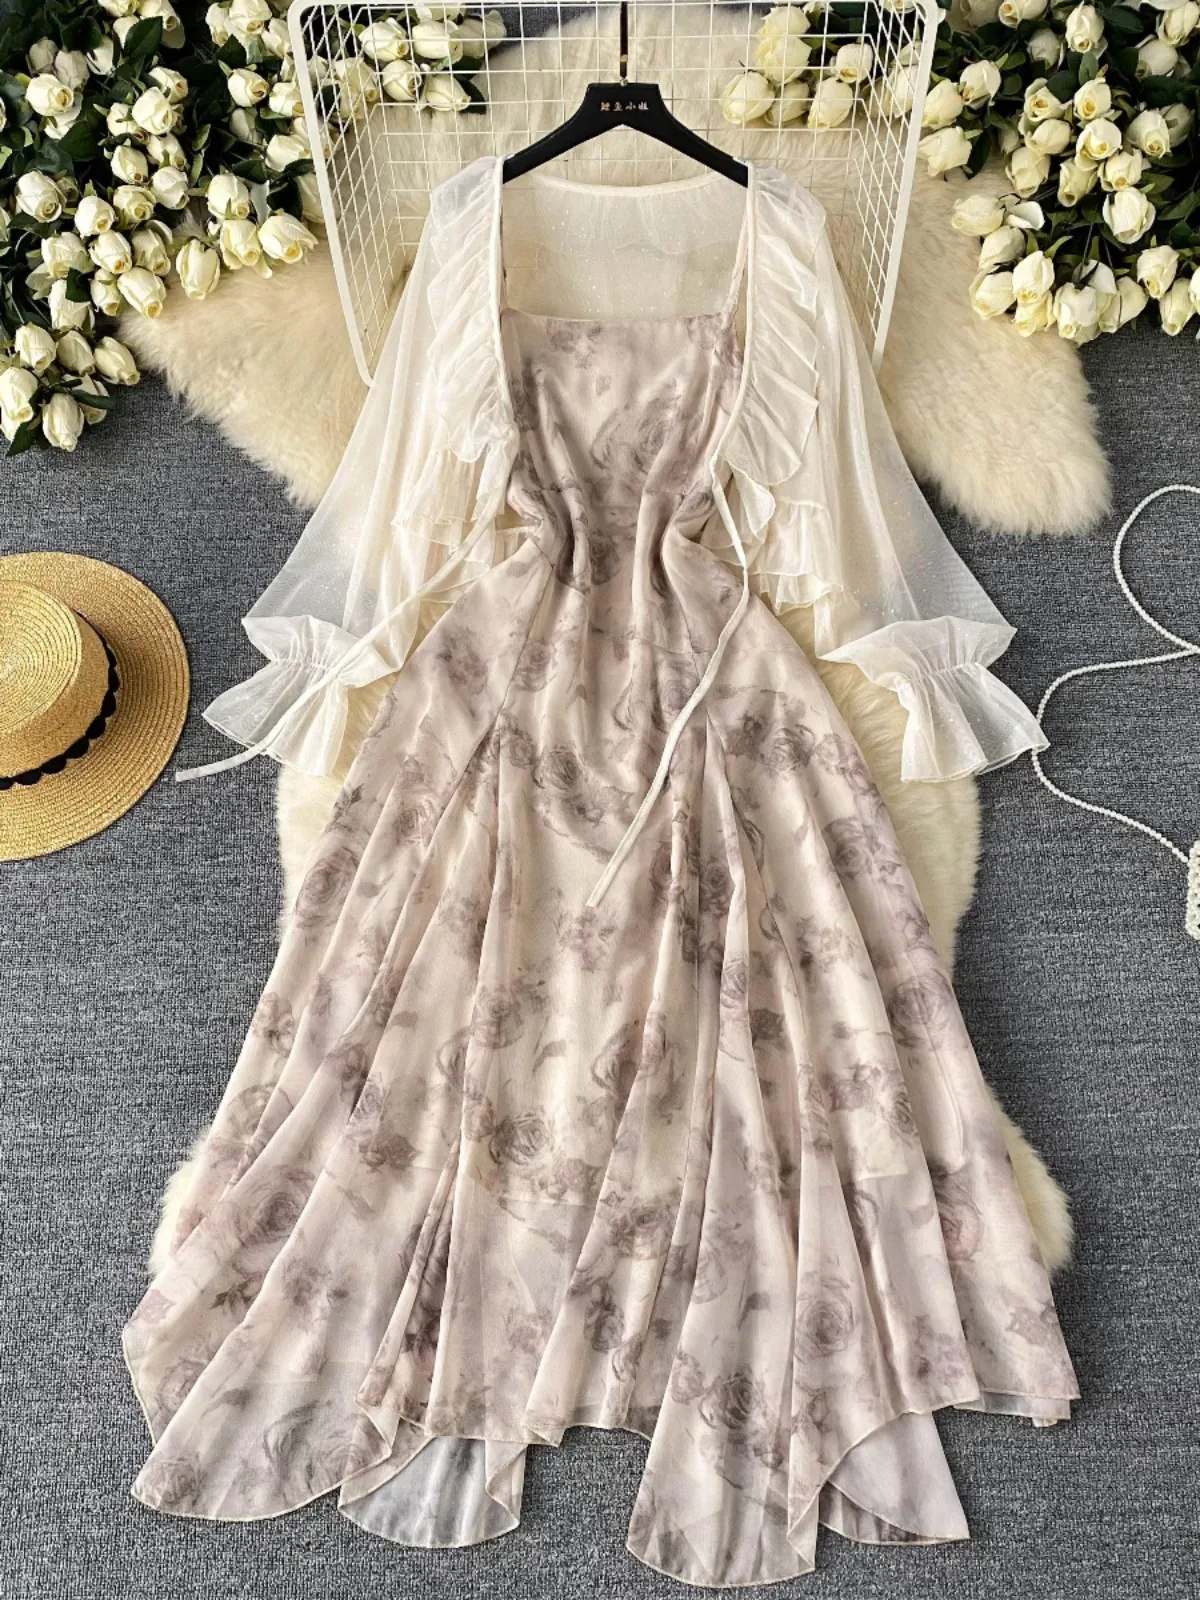 French romantic and gentle atmosphere, floral suspender dress+ruffle edge mesh sunscreen shirt two-piece set